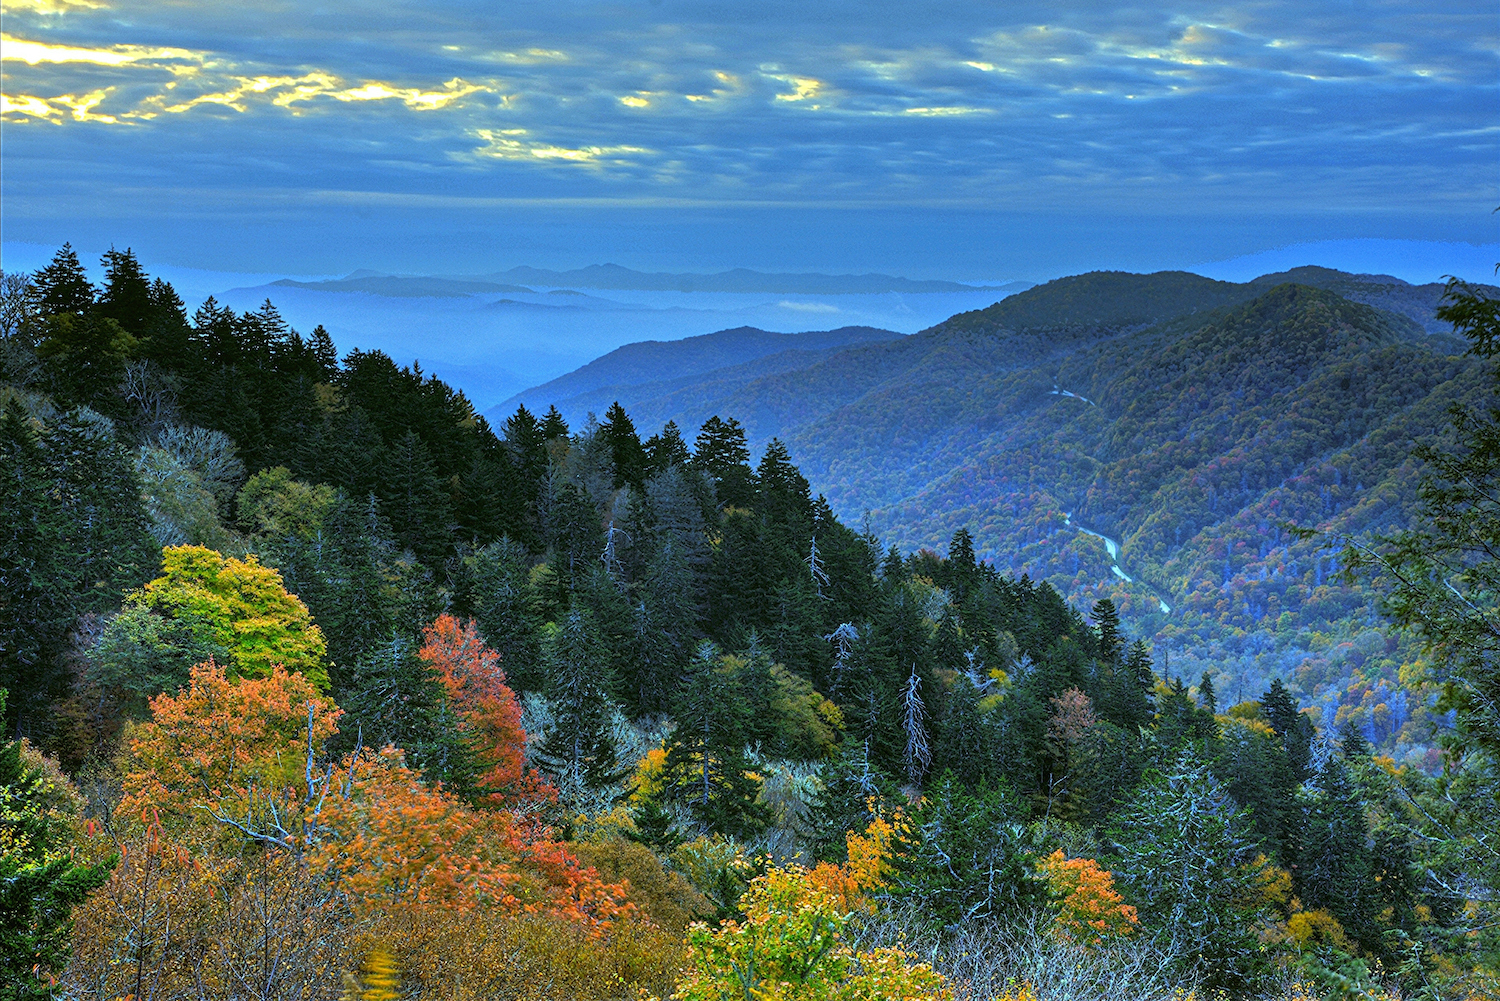 Newfound Gap Sunrise at Great Smoky Mountains National Park